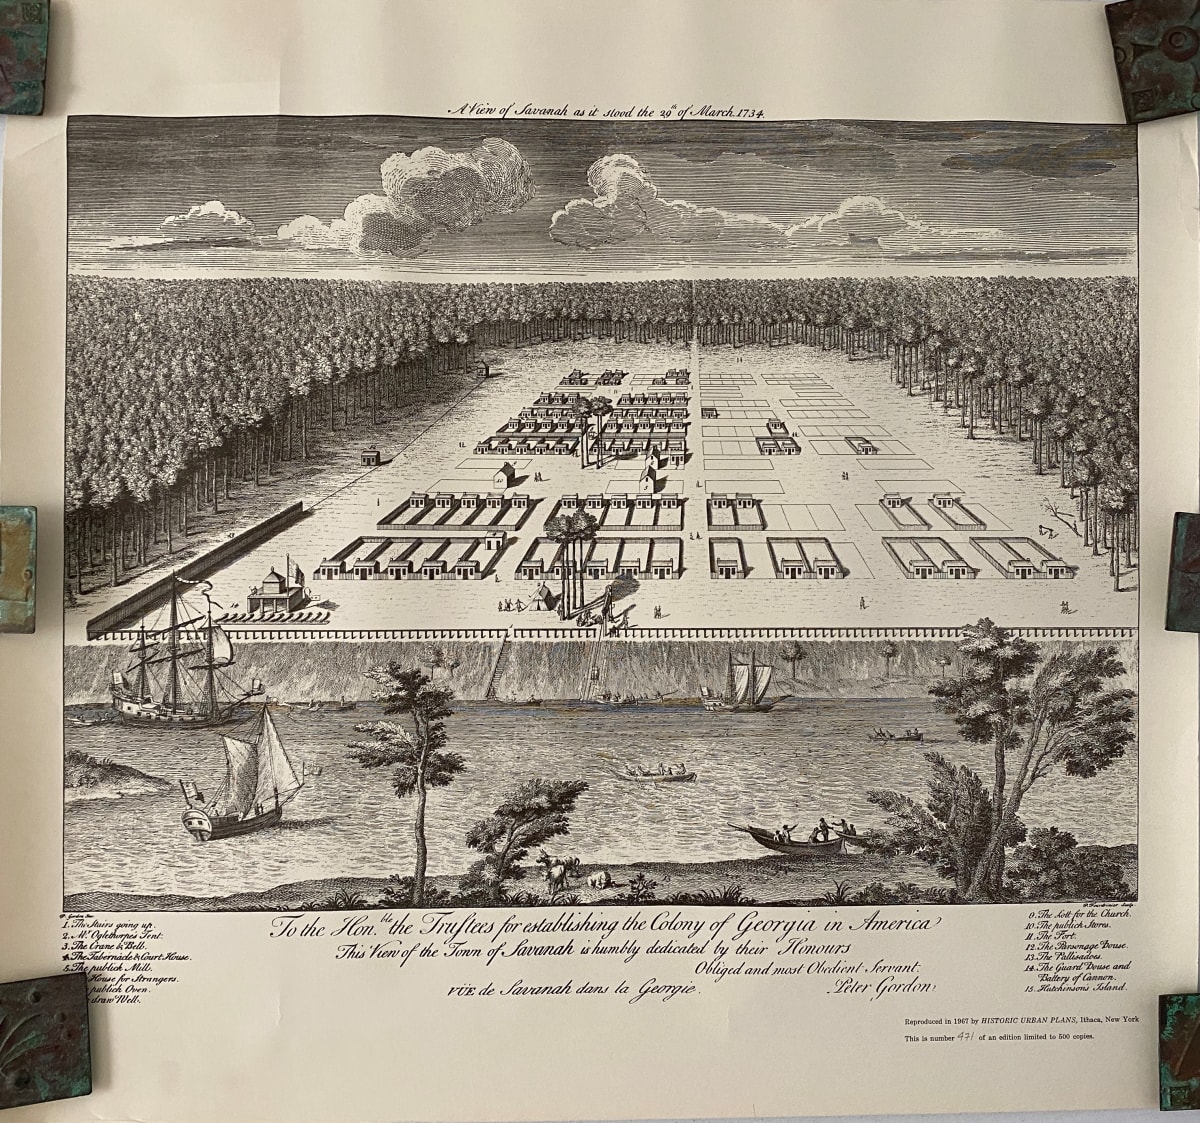 A View of Savanah as it stood the 19th of March 1734 by P. Fourdrinier 